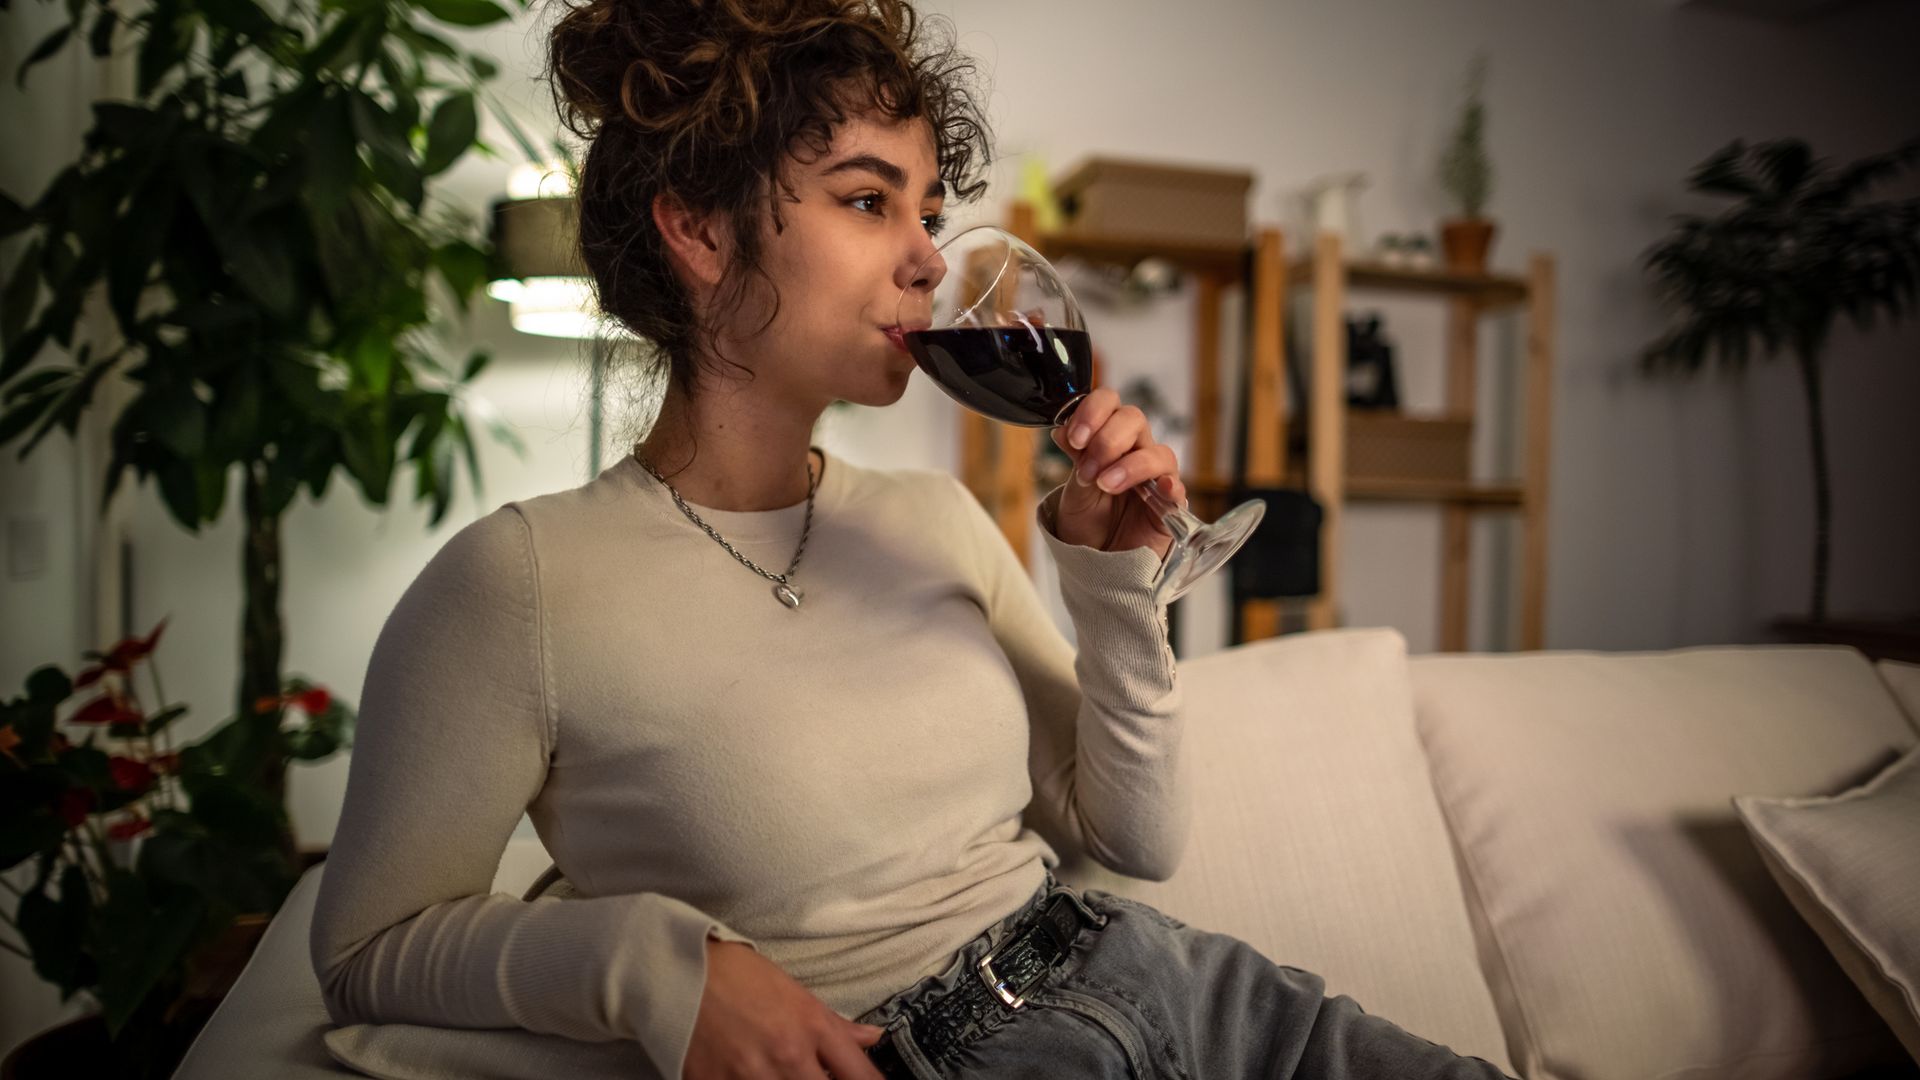 Shot of a young woman relaxing at night on sofa with a glass of wine.